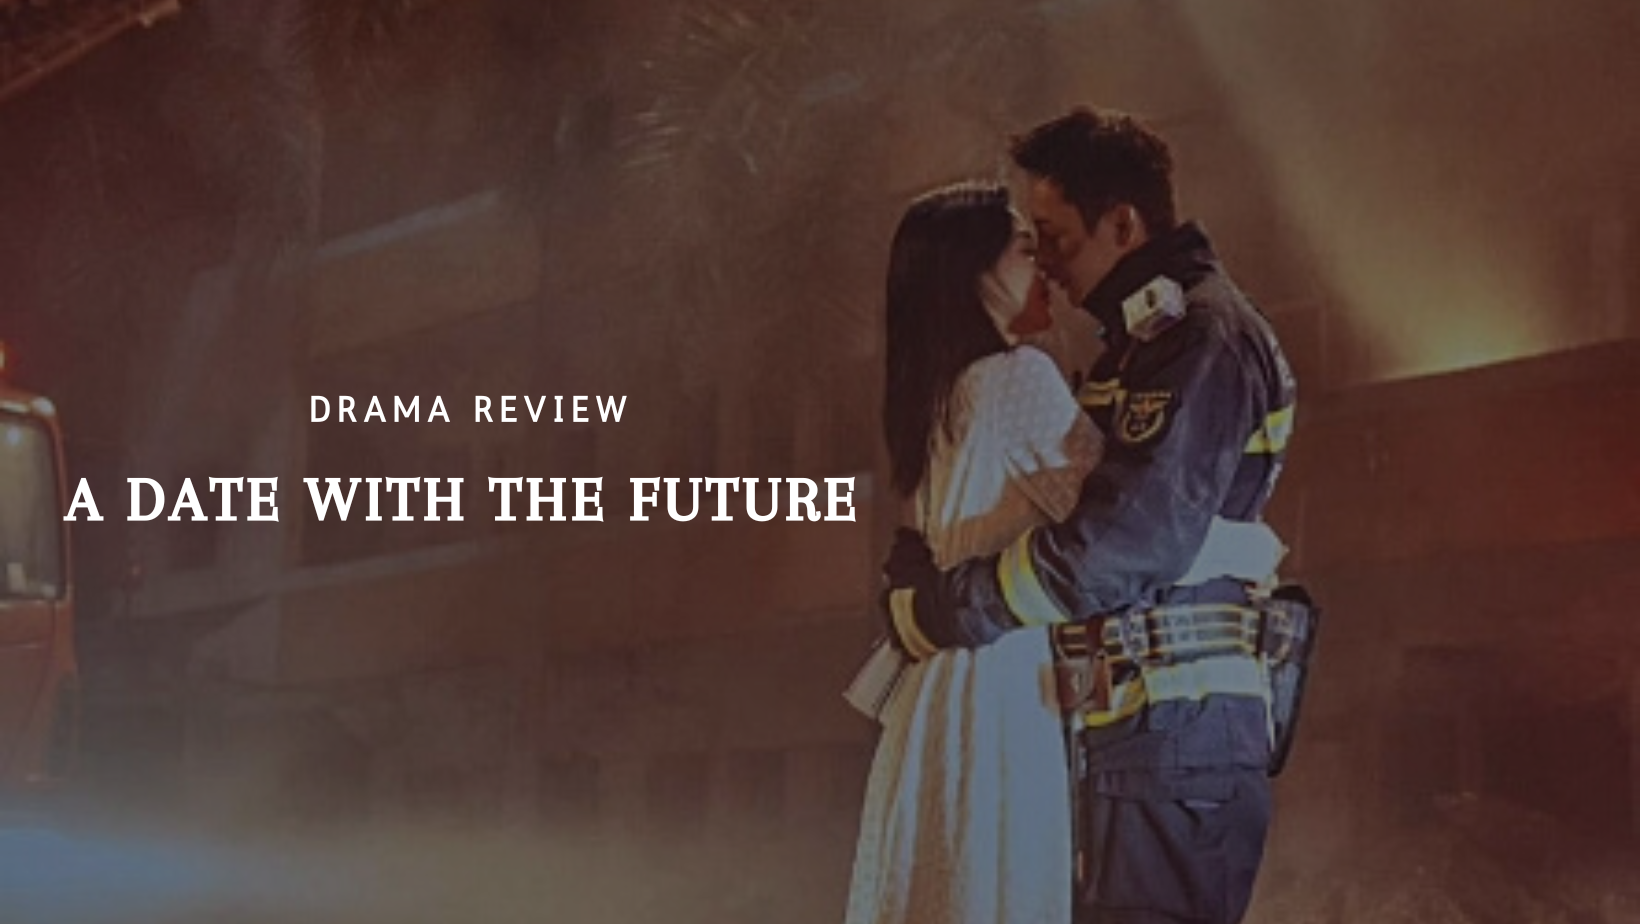 Drama Review: A Date With the Future